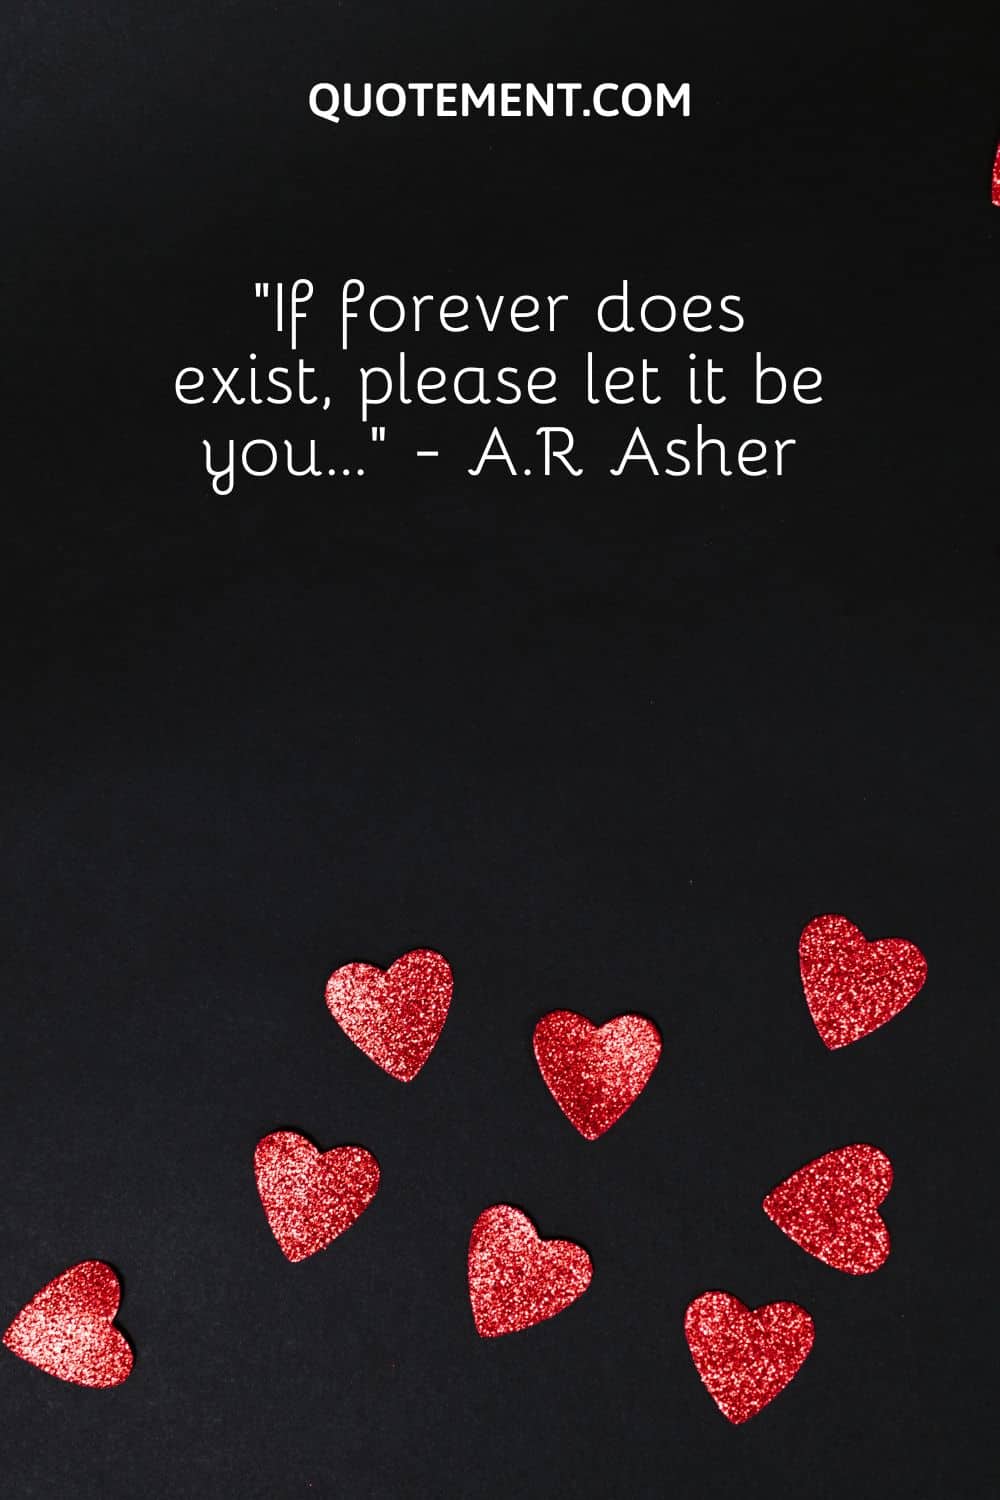 “If forever does exist, please let it be you…” - A.R Asher